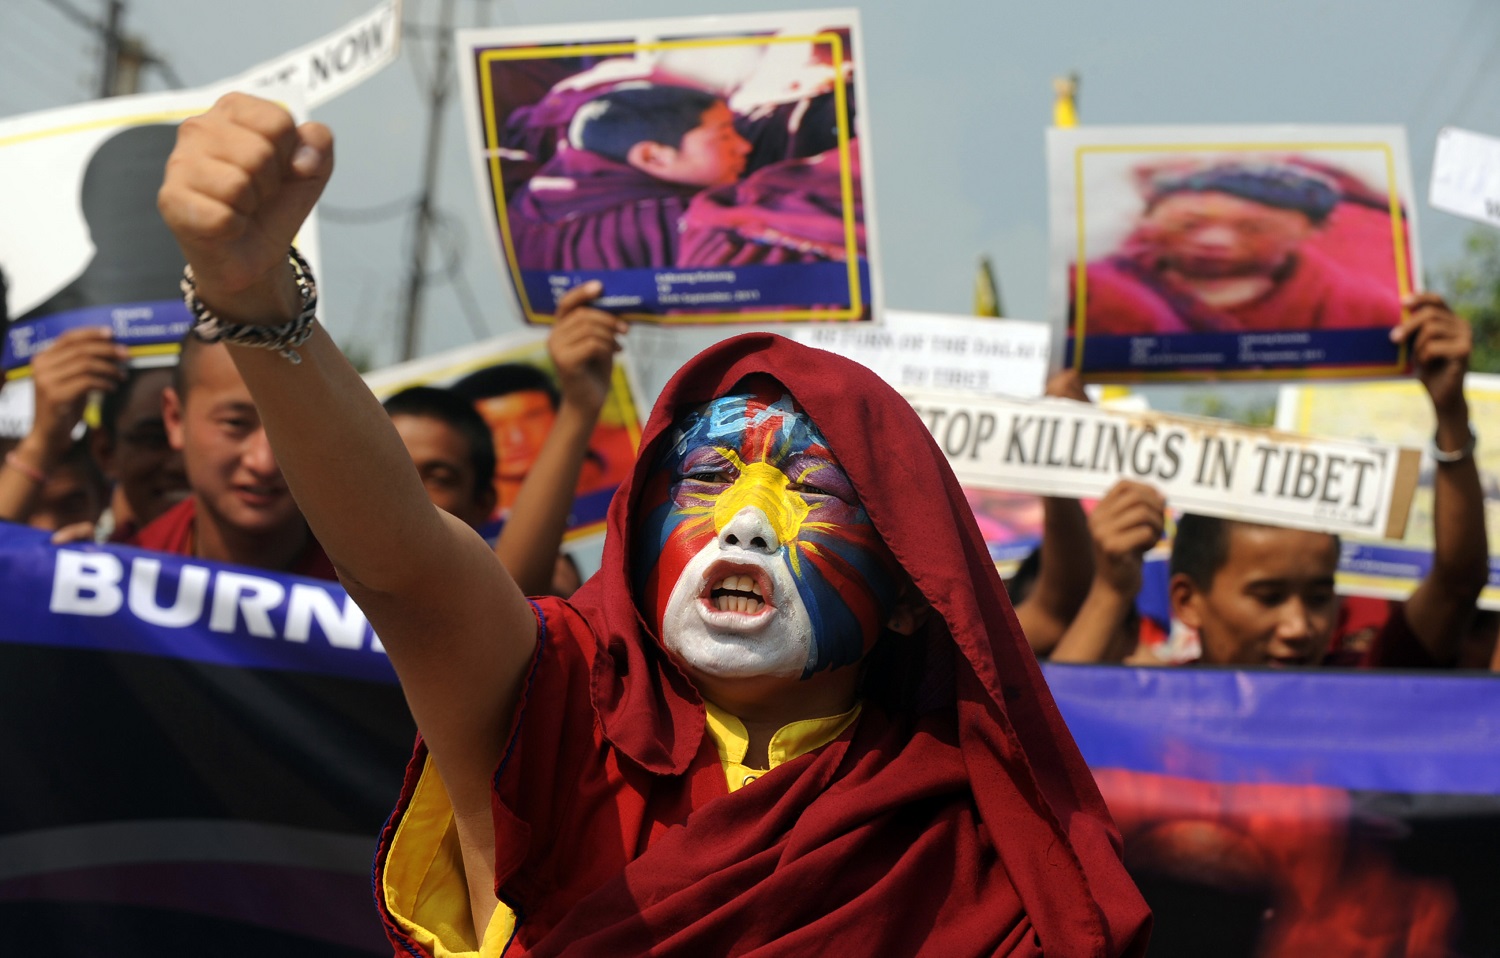 A Buddhist monk with the Tibetan flag painted on his face, in Siliguri, India, November 2011, protests in solidarity with dozens of monks who self-immolated in Tibetan parts of China to draw attention to their opposition to Beijing’s repression of indigenous culture.